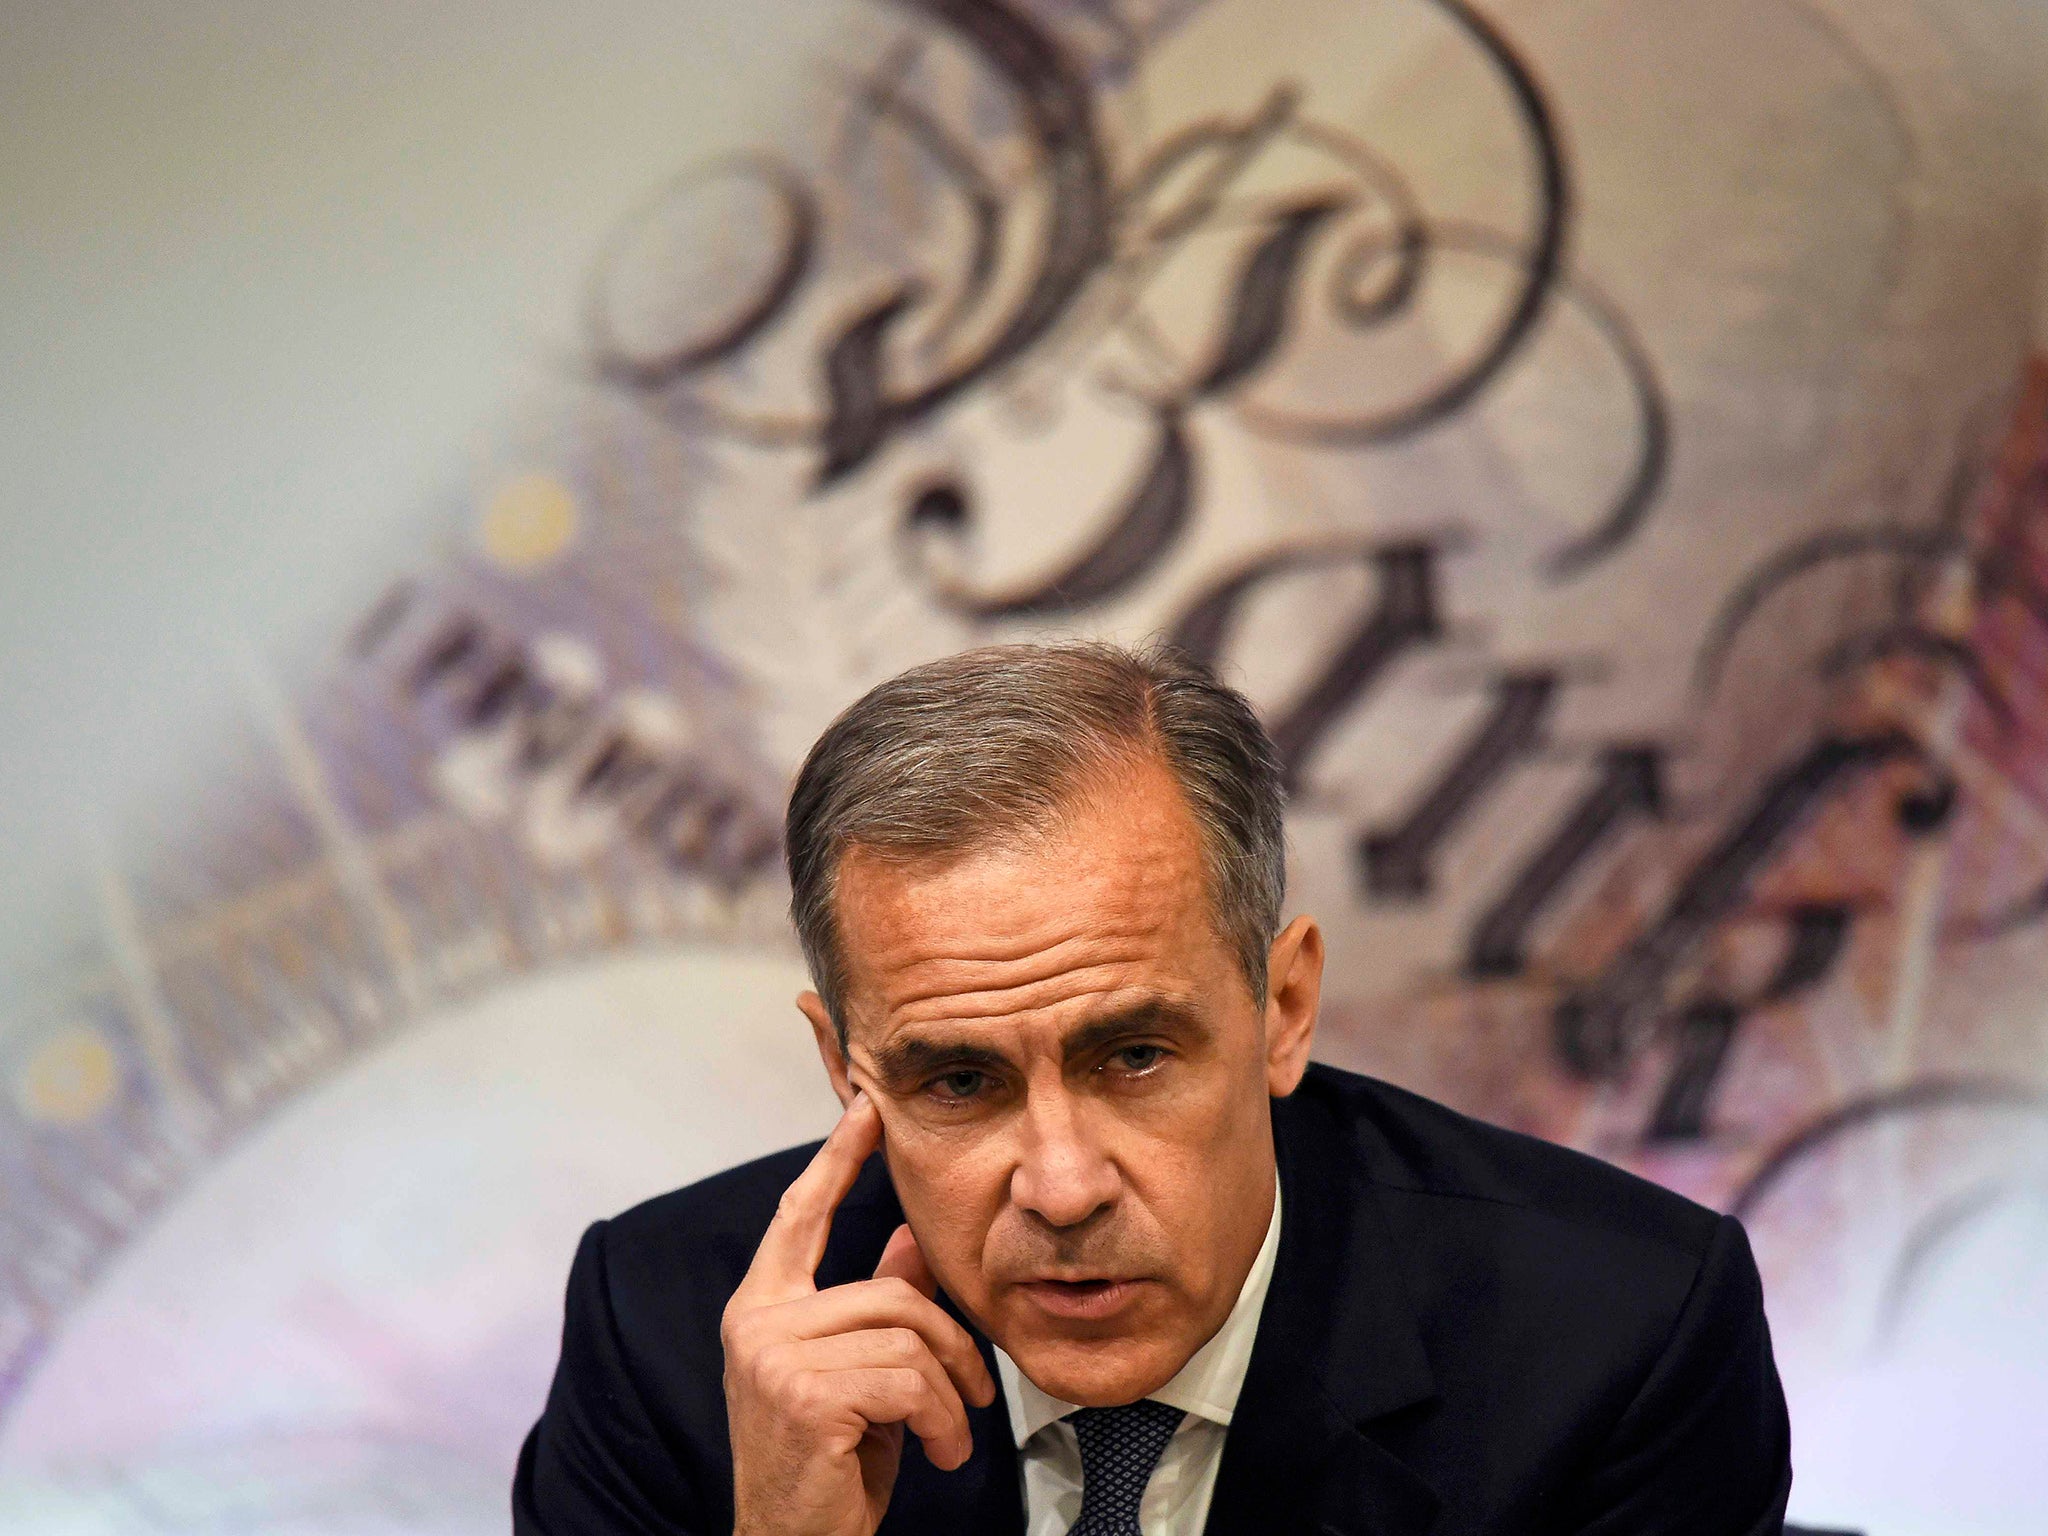 The Bank of England has been strengthened since regaining regulatory control of the banks